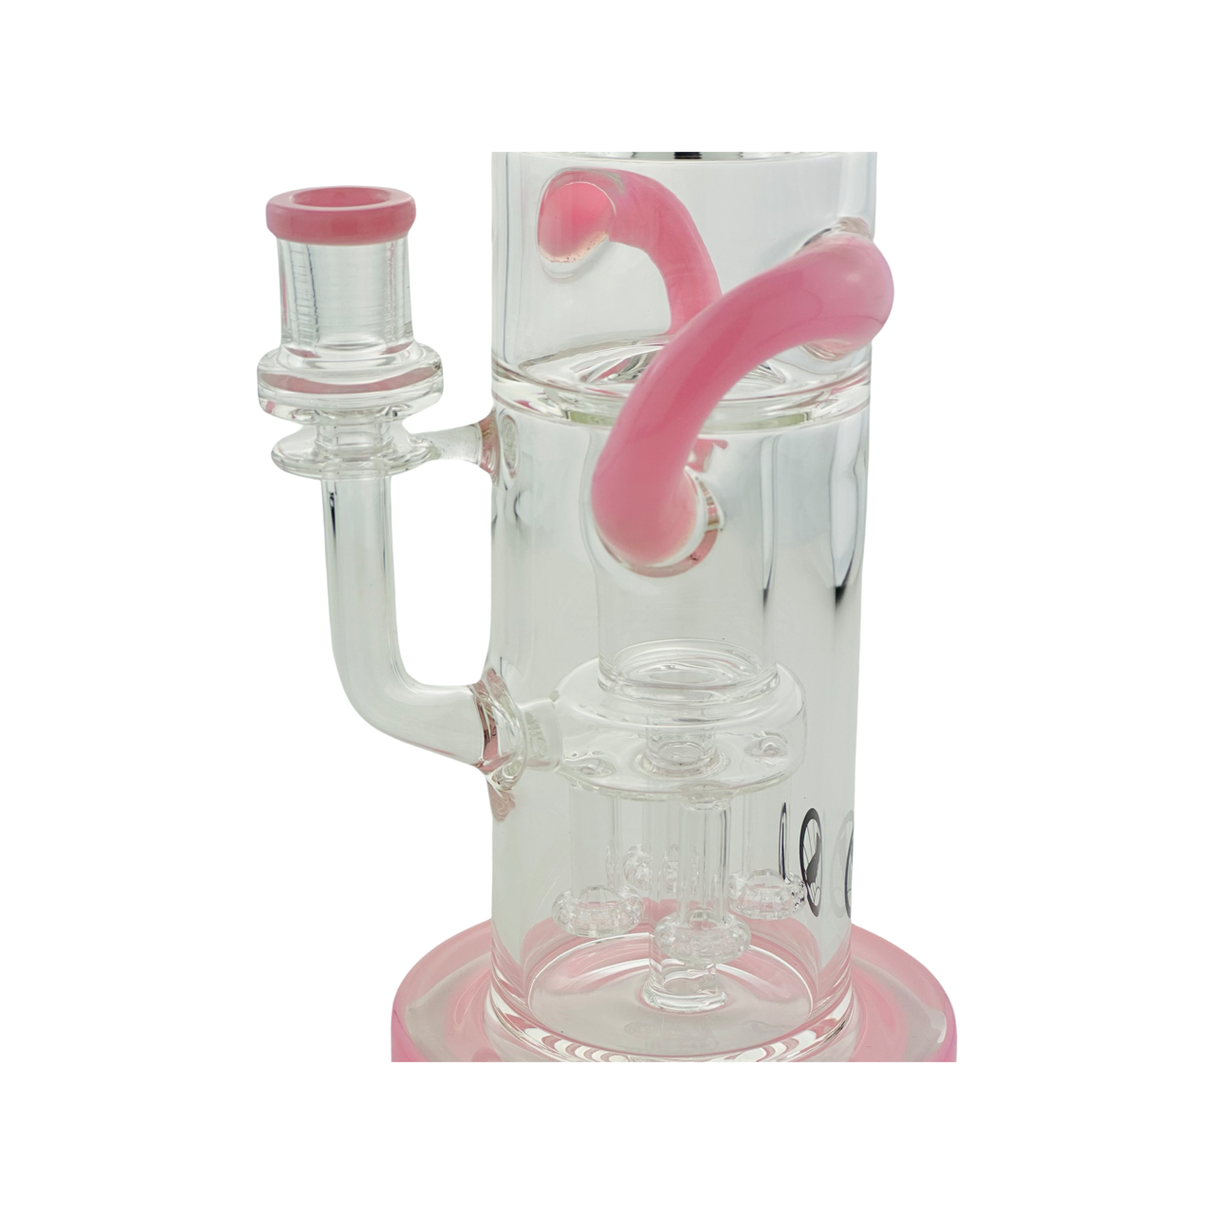 MAV Glass Quad Love Long Neck Double Intake Incycler Dab Rig with Pink Accents